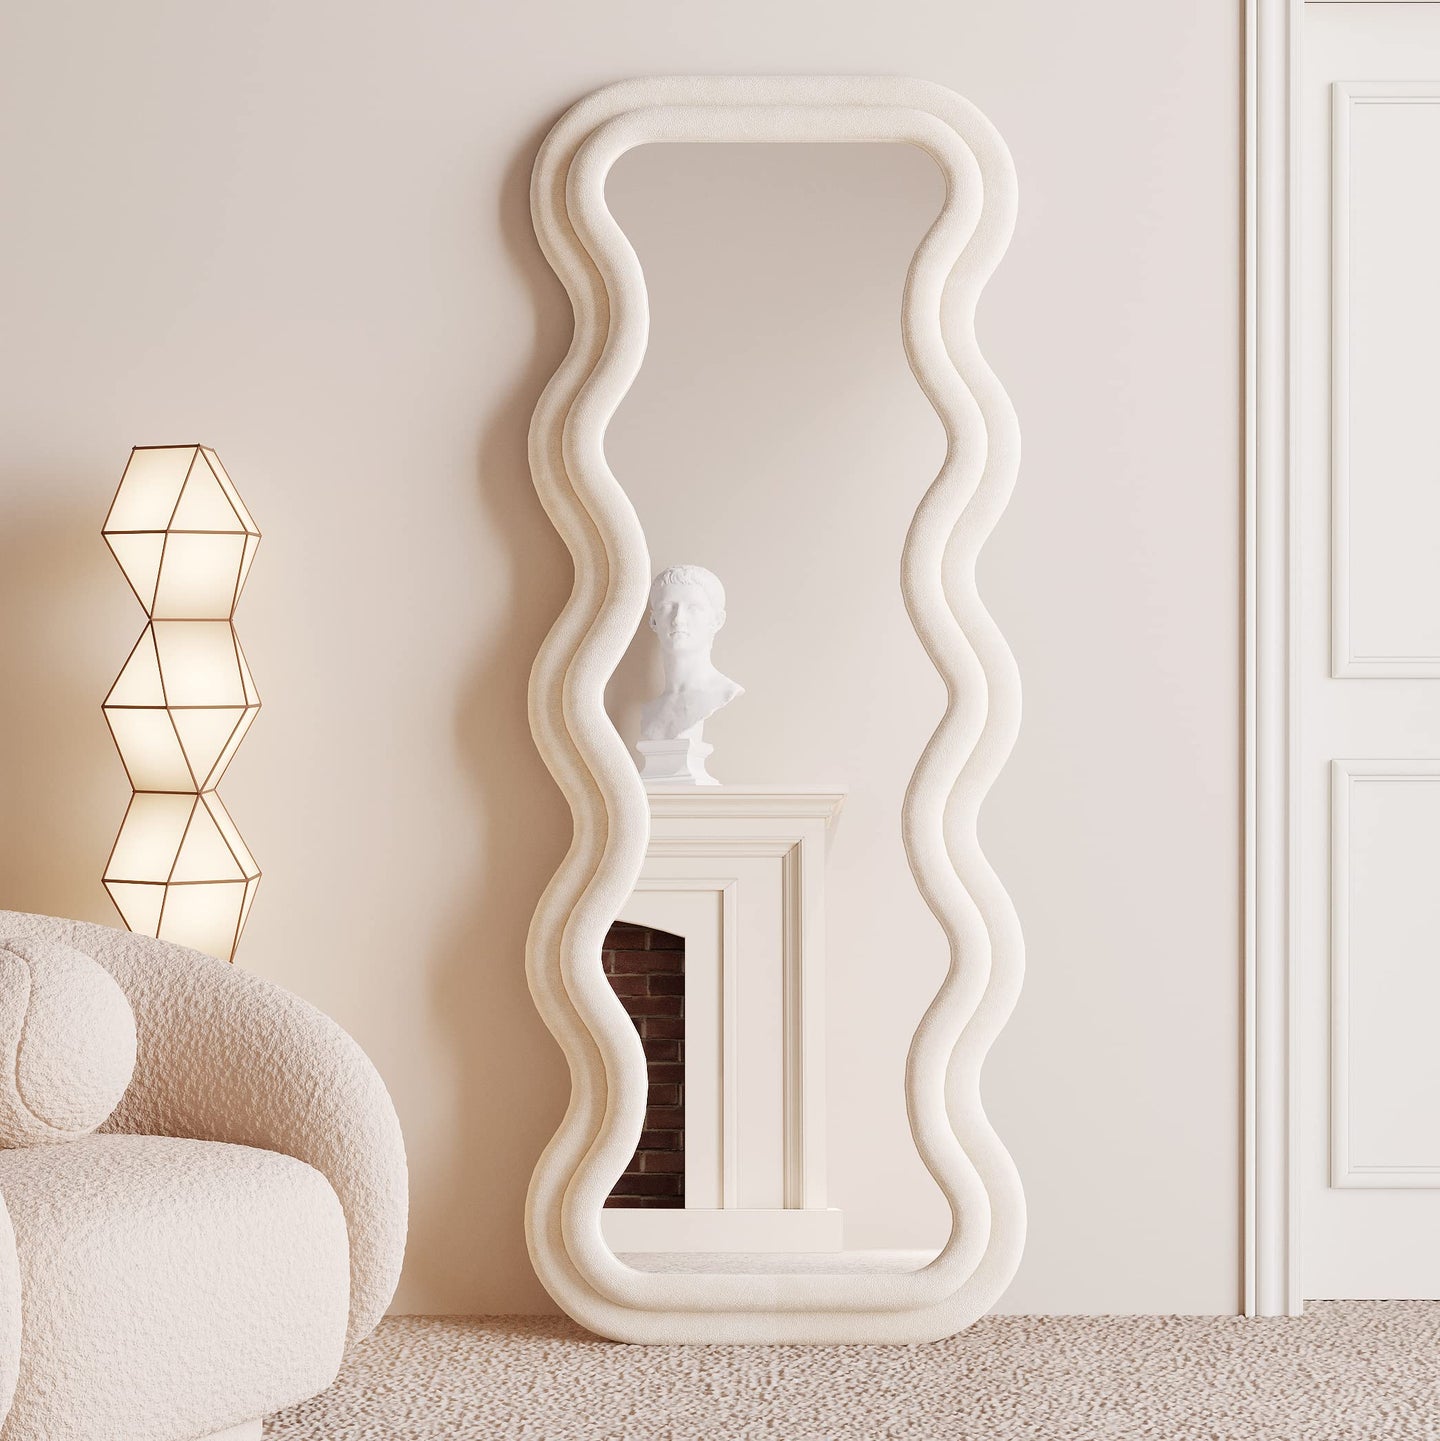 BOJOY Full Length Mirror 63"x24", Irregular Wavy Mirror, Arched Floor Mirror, Wall Mirror Standing Hanging or Leaning Against Wall for Bedroom, Flannel Wrapped Wooden Frame Mirror -White